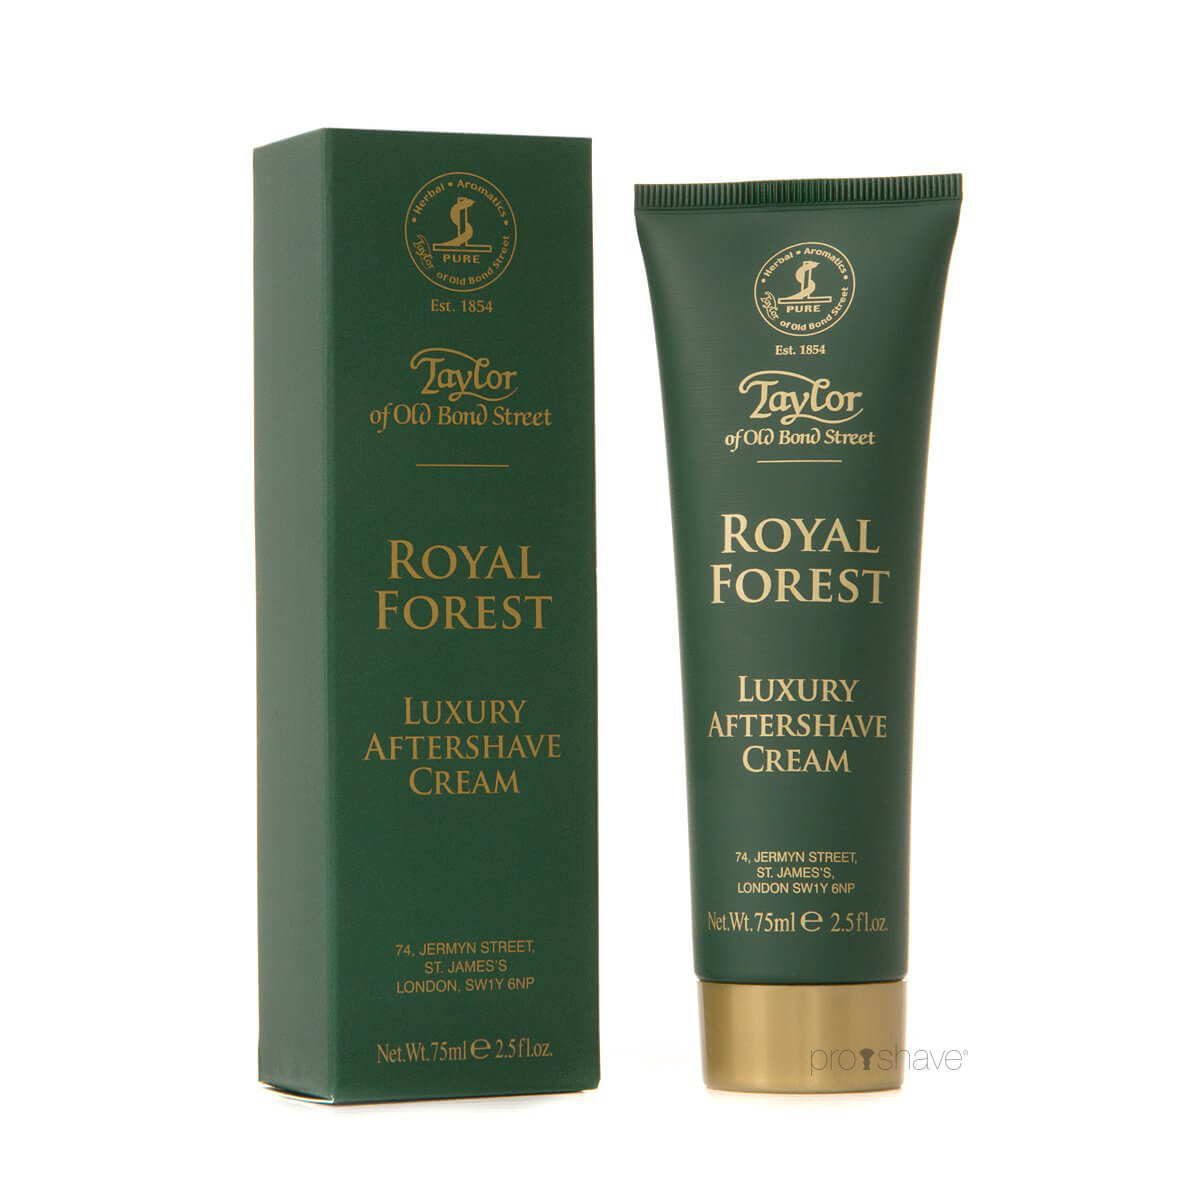 Taylor Of Old Bond Street Aftershave Cream, Royal Forest, 75 ml.